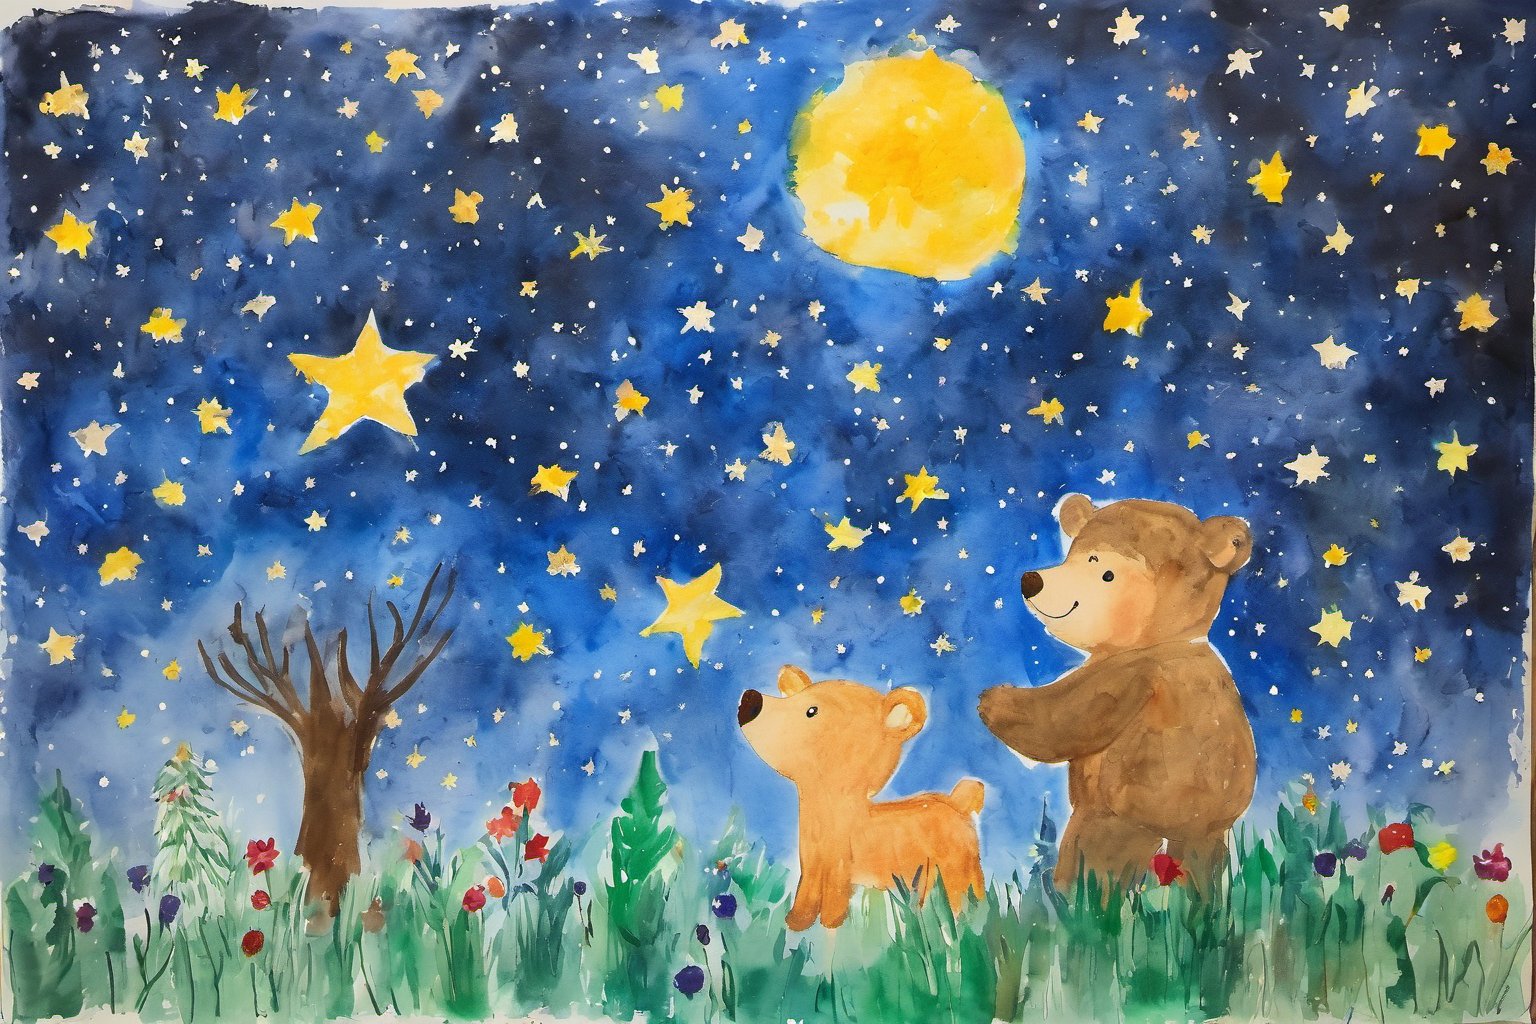 Children's painting, color painting, The star laughed softly and said, " Little Bear. I can see the whole world from up here. I see little birds flying at dawn, deer playing in the forest, and many children like you looking at the stars."